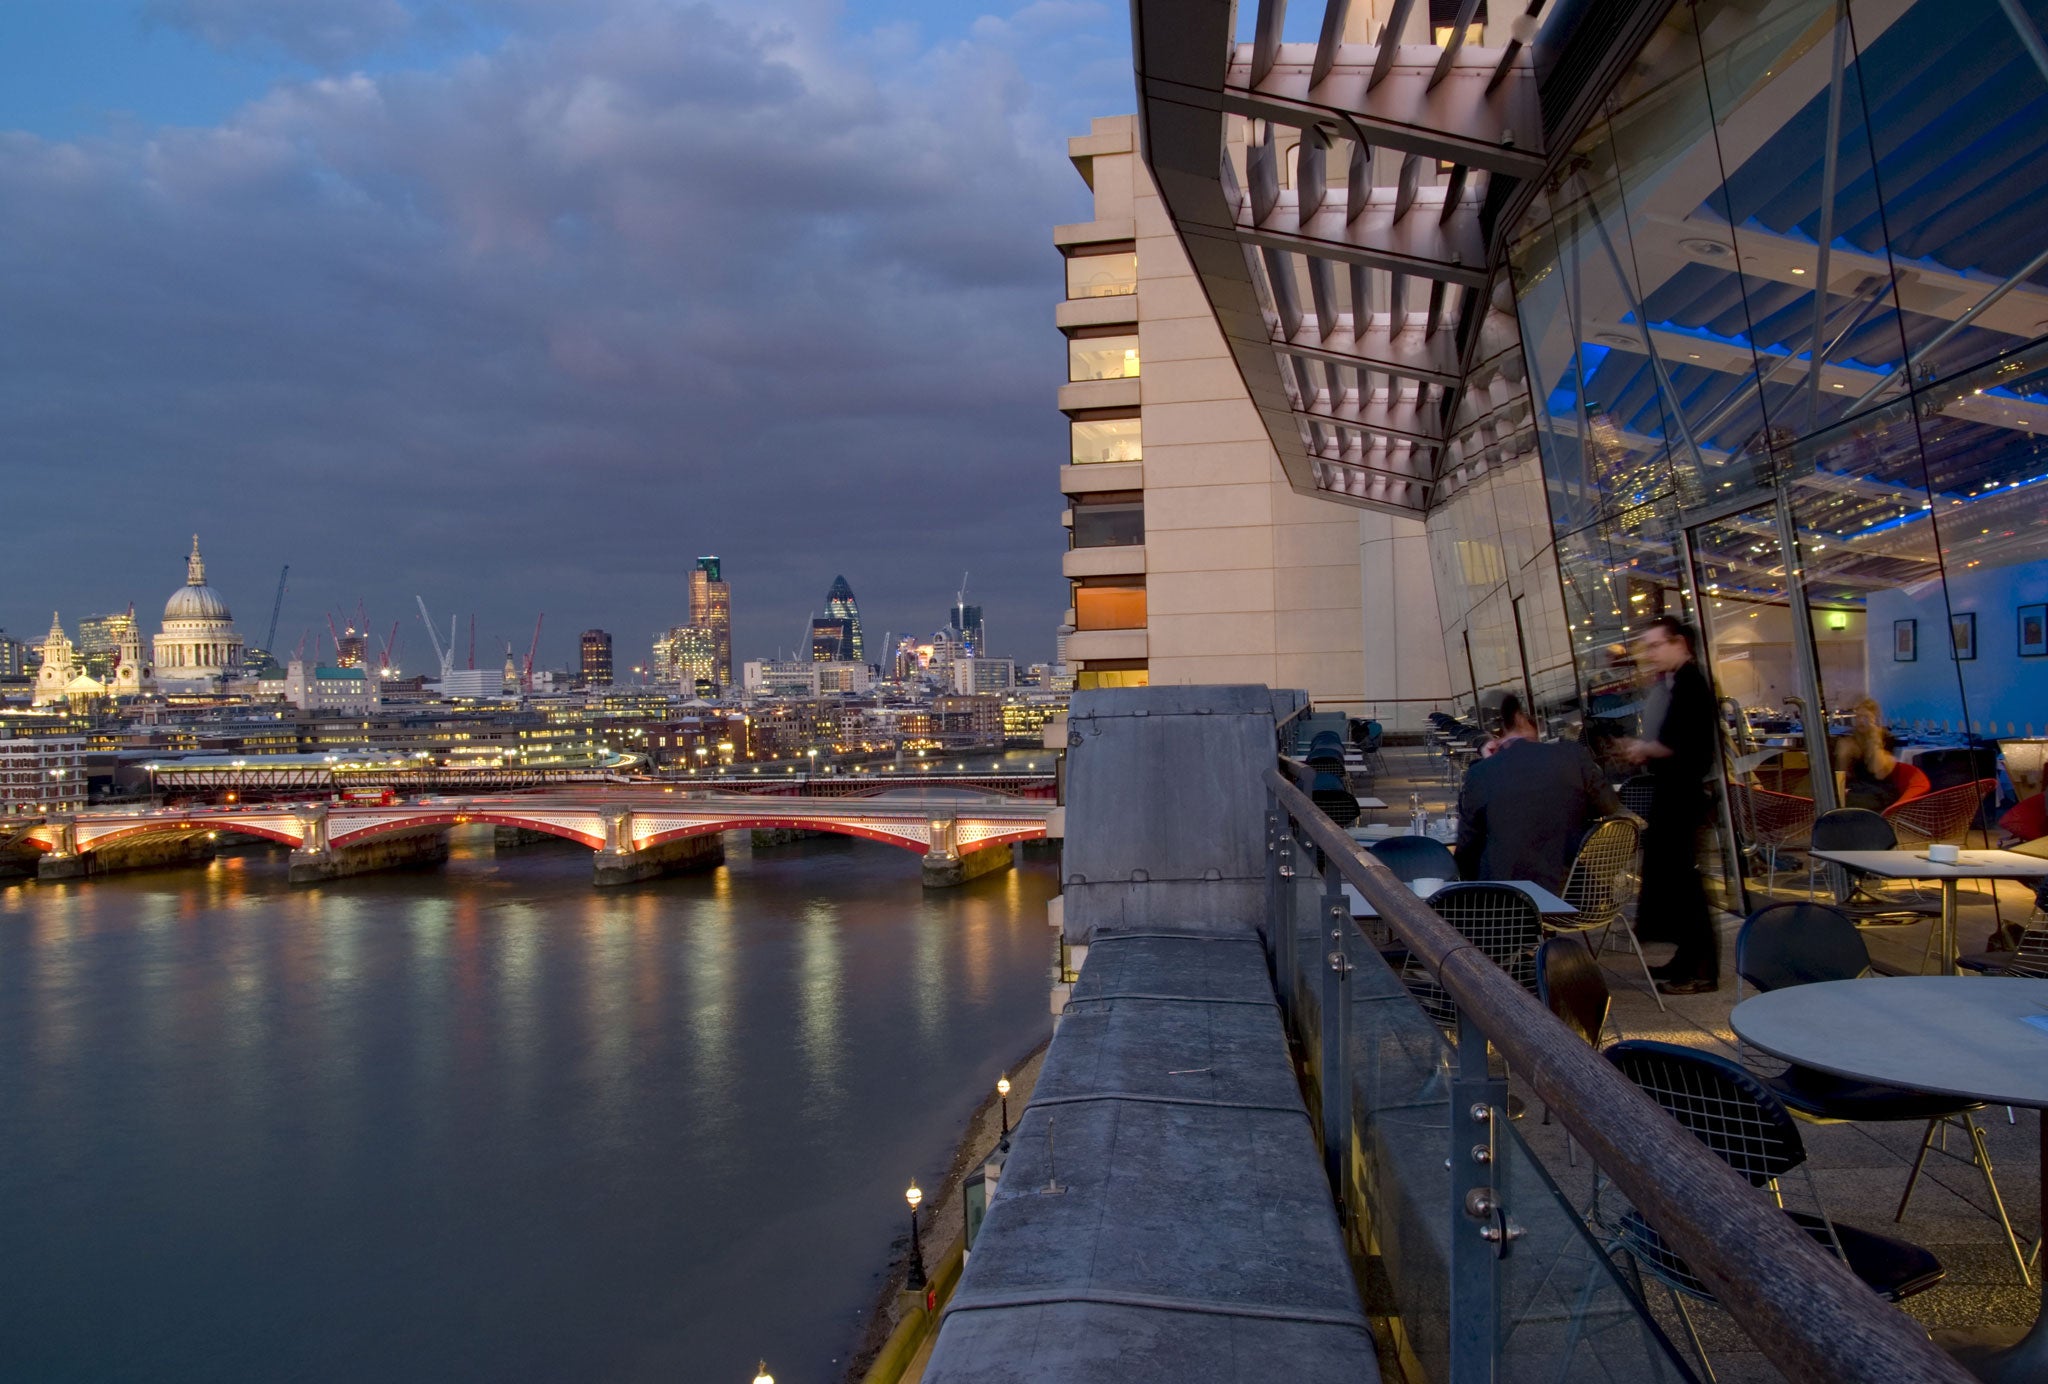 Have a three-course meal for £35 at Oxo Tower